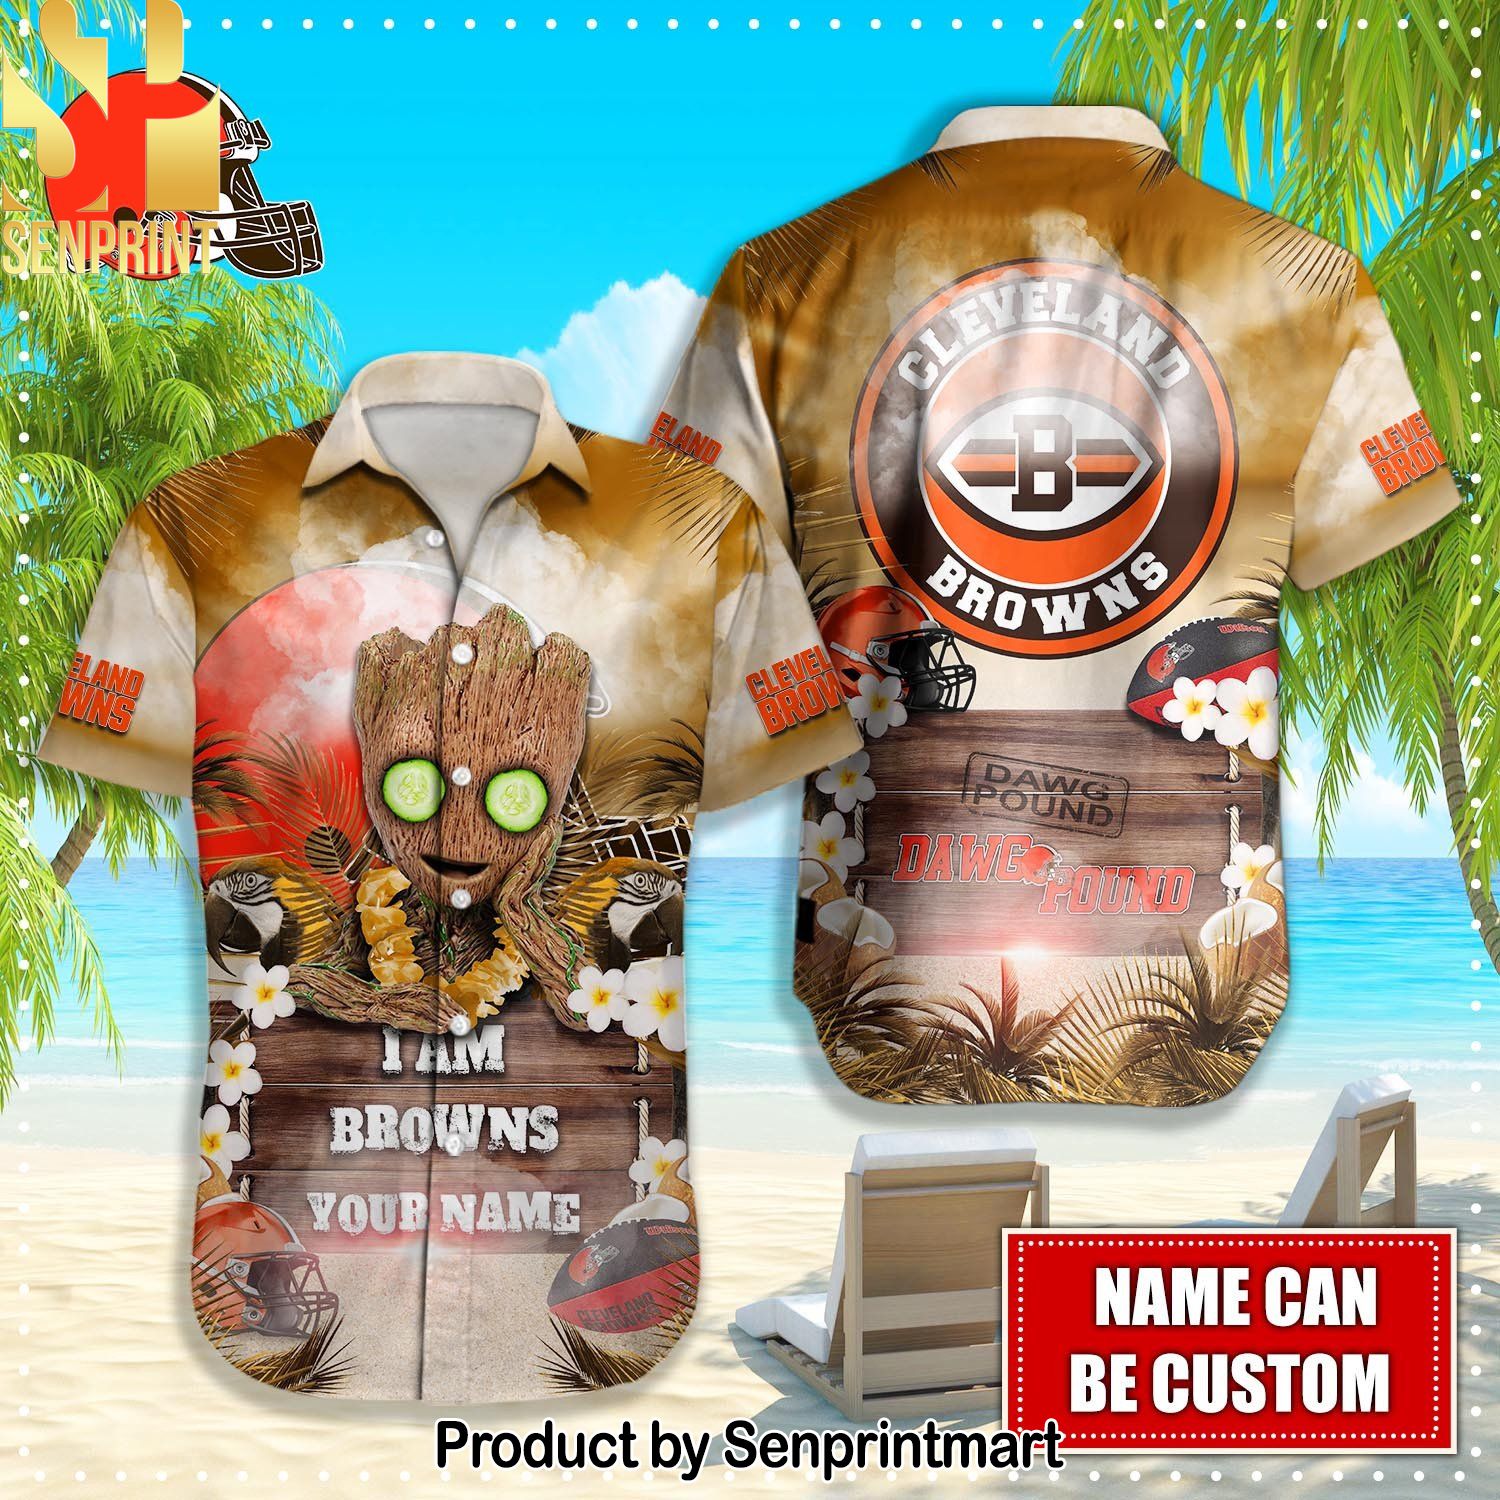 Cleveland Browns NFL For Fans All Over Printed Hawaiian Shirt and Shorts